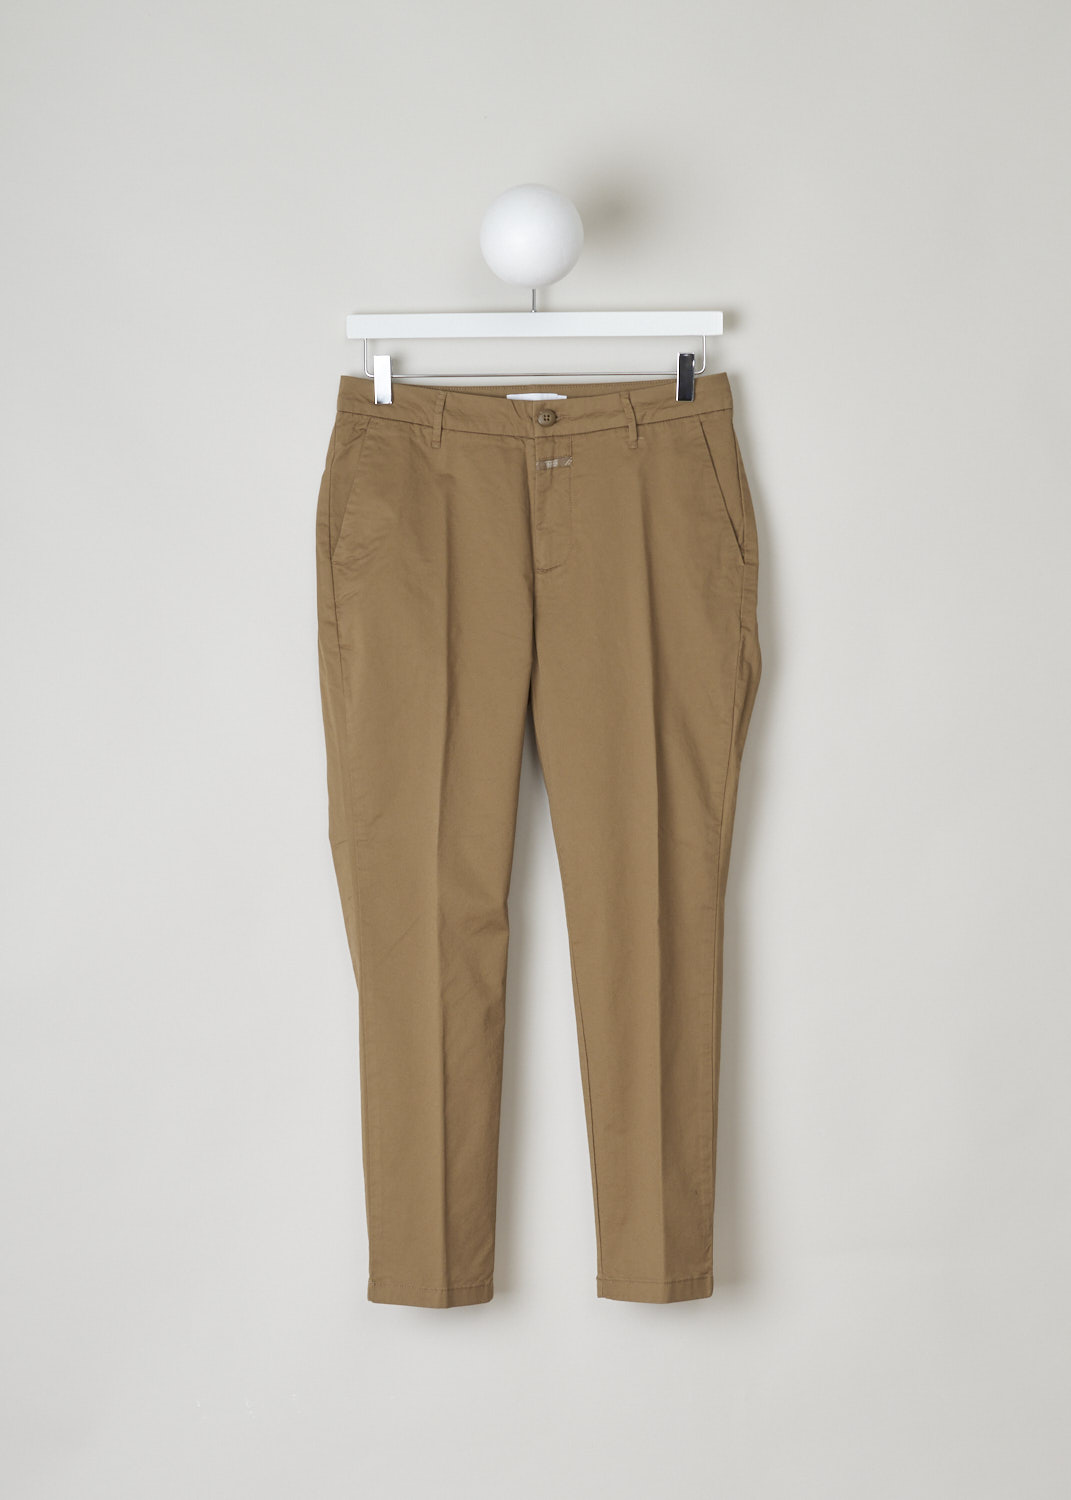 Closed, Caramel brown flat front chino, jack_C91012_30D_20_991, brown, front, This caramel brown flat front chino is one of those must have basics that goes well anything you throw on it. Featuring a regular length, two forward slanted pockets on the front and two welt pockets on the back.